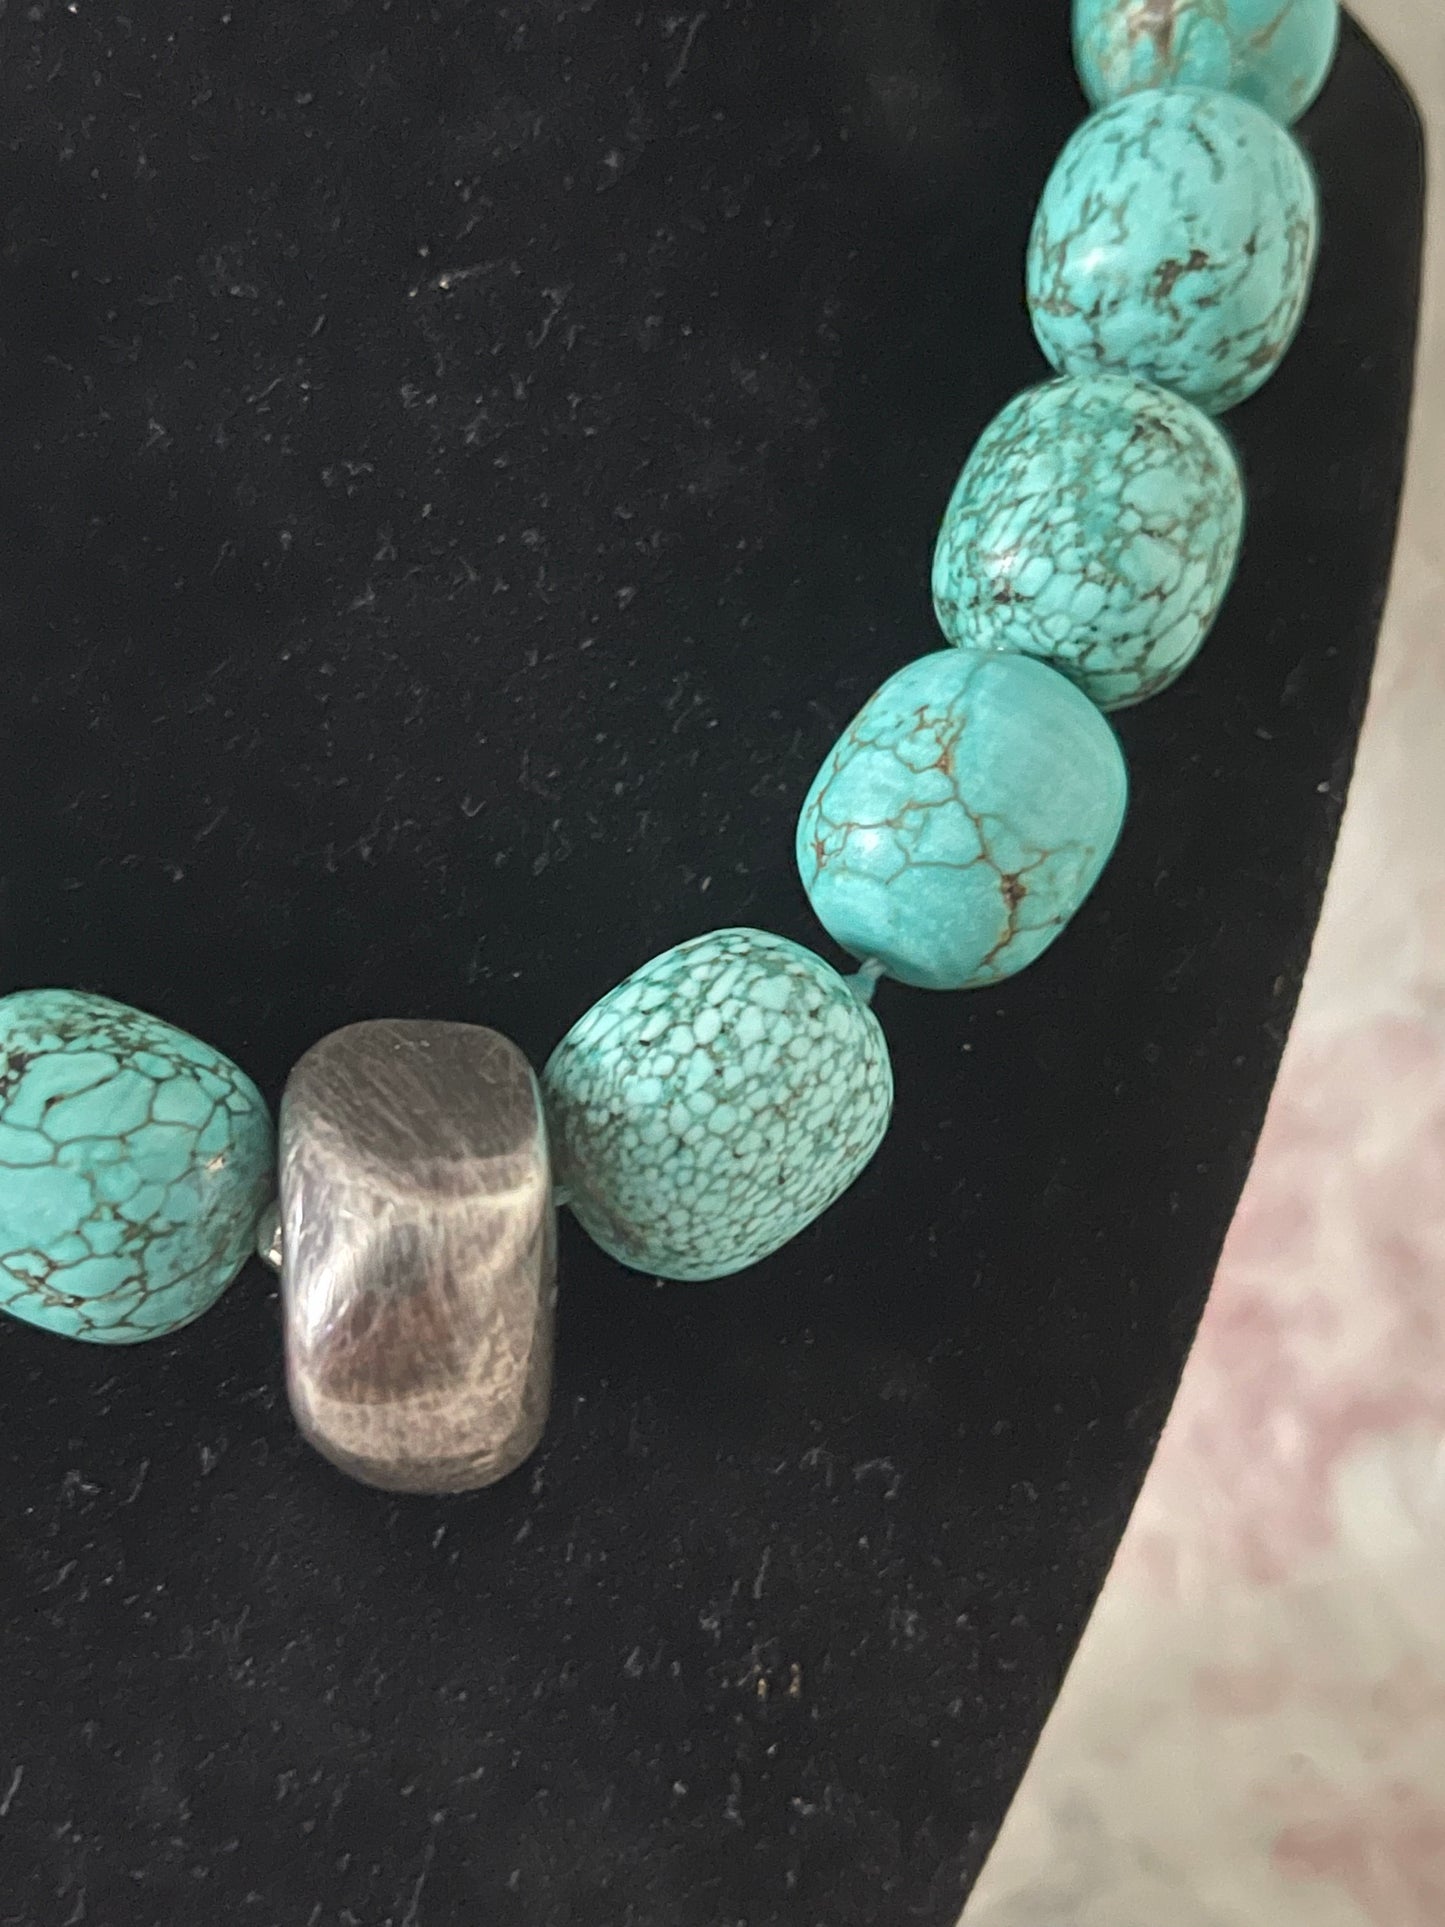 Vintage turquoise necklace